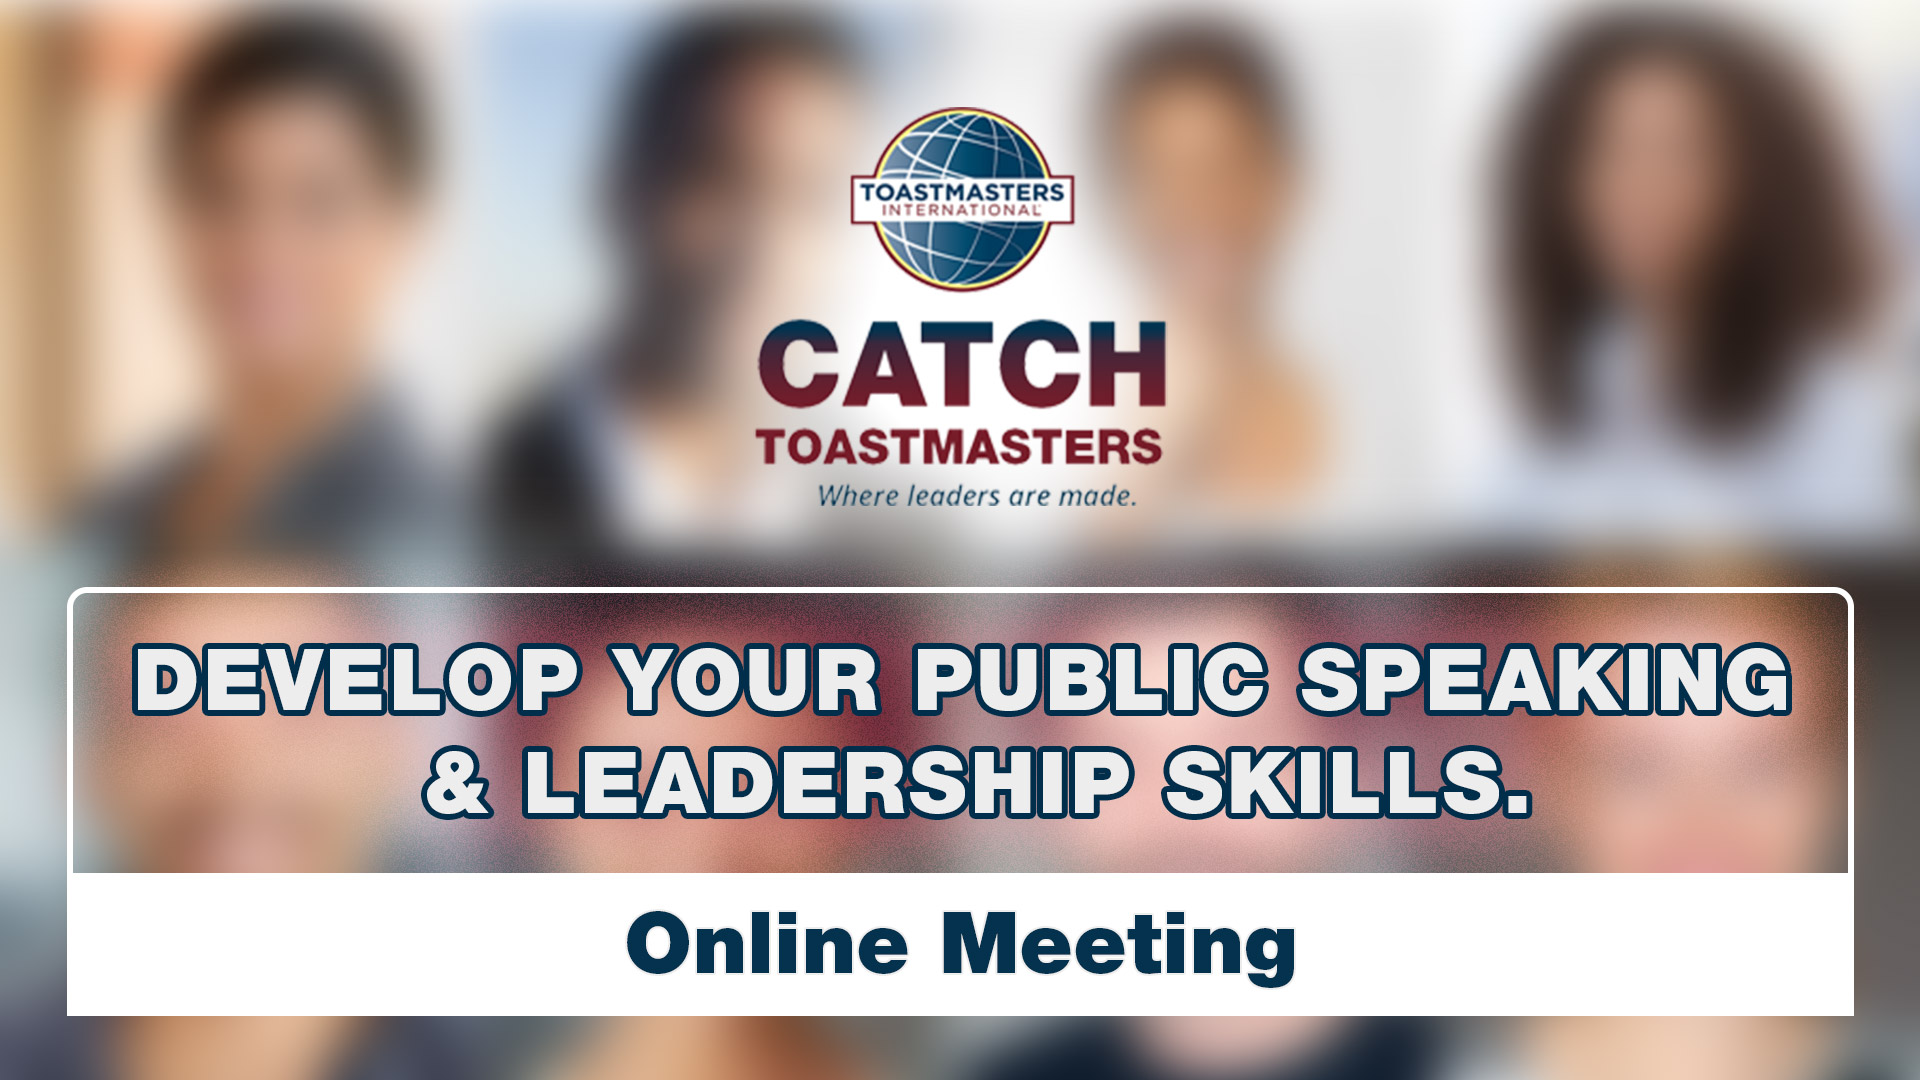 CATCH TOASTMASTER - Virtual Online Meeting - Develop Communication and Leadership Skills